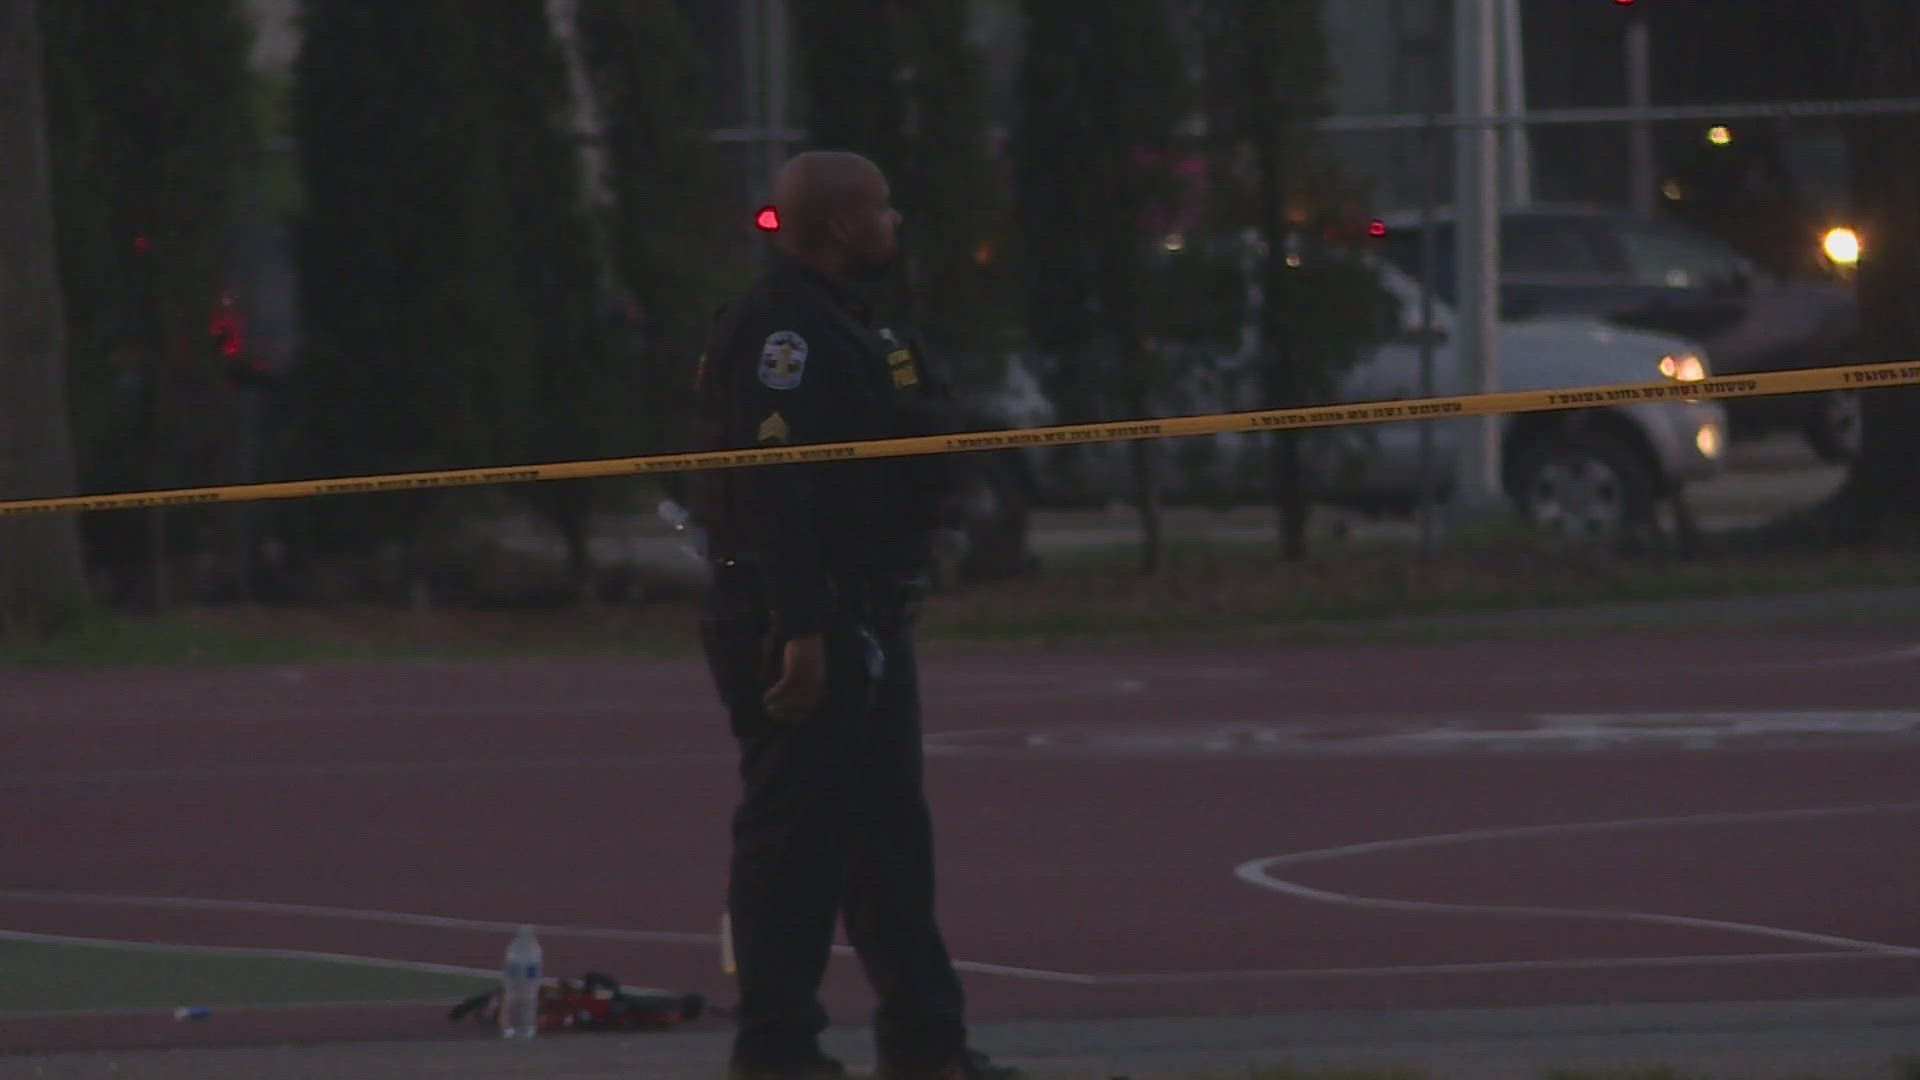 Authorities said they received several 911 calls around 7:13 p.m. about a shooting that happened at Wyandotte Park.